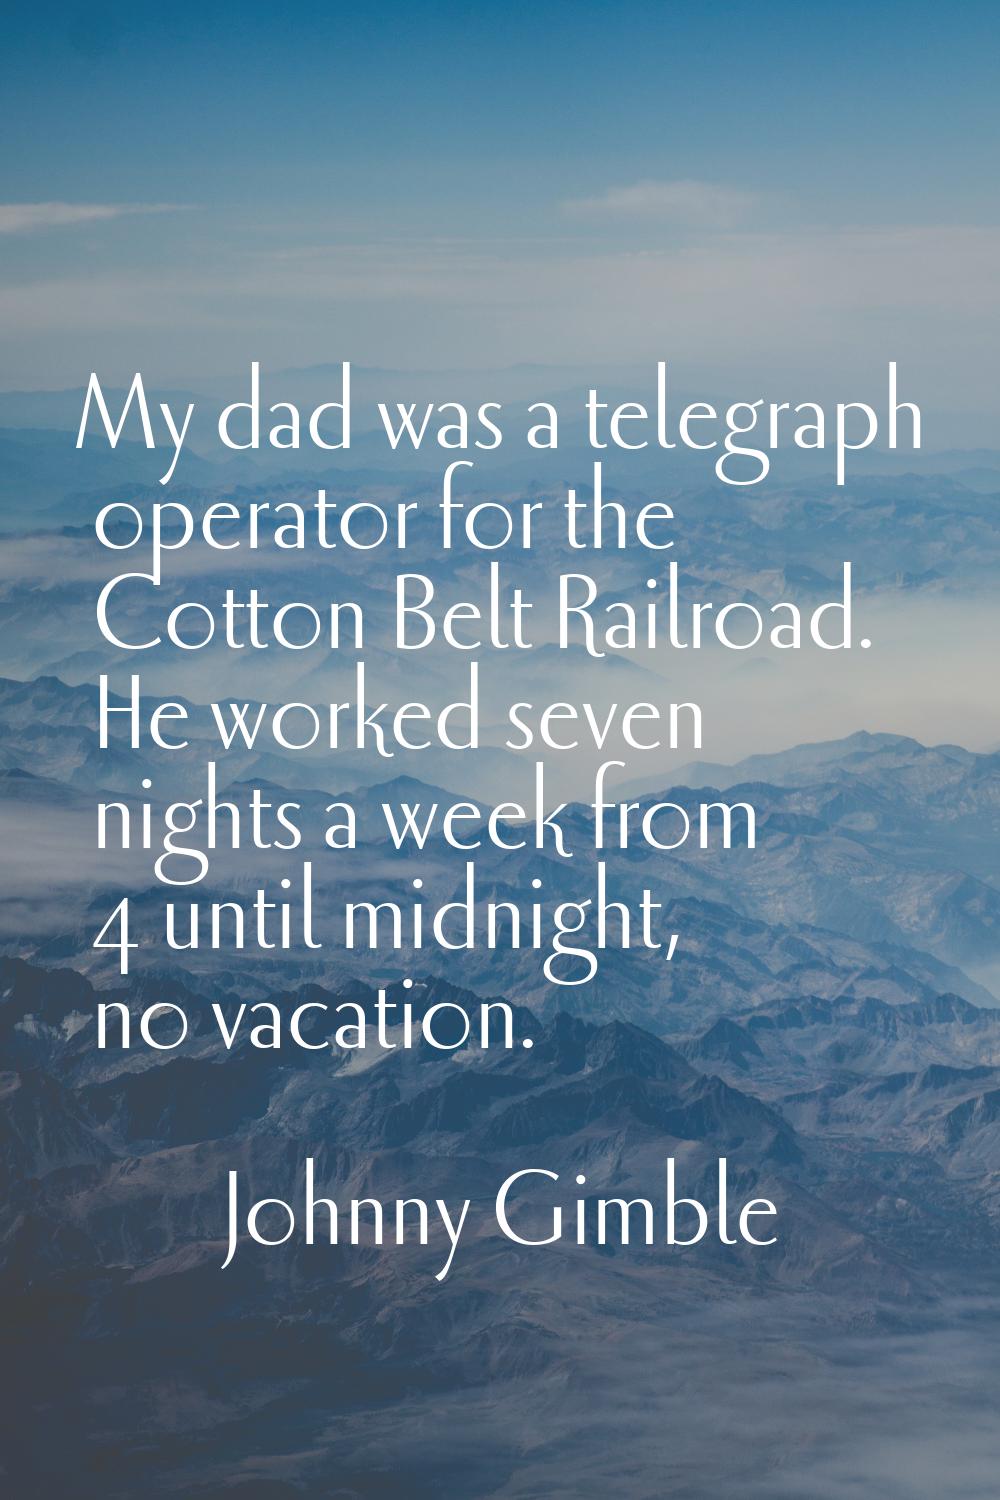 My dad was a telegraph operator for the Cotton Belt Railroad. He worked seven nights a week from 4 